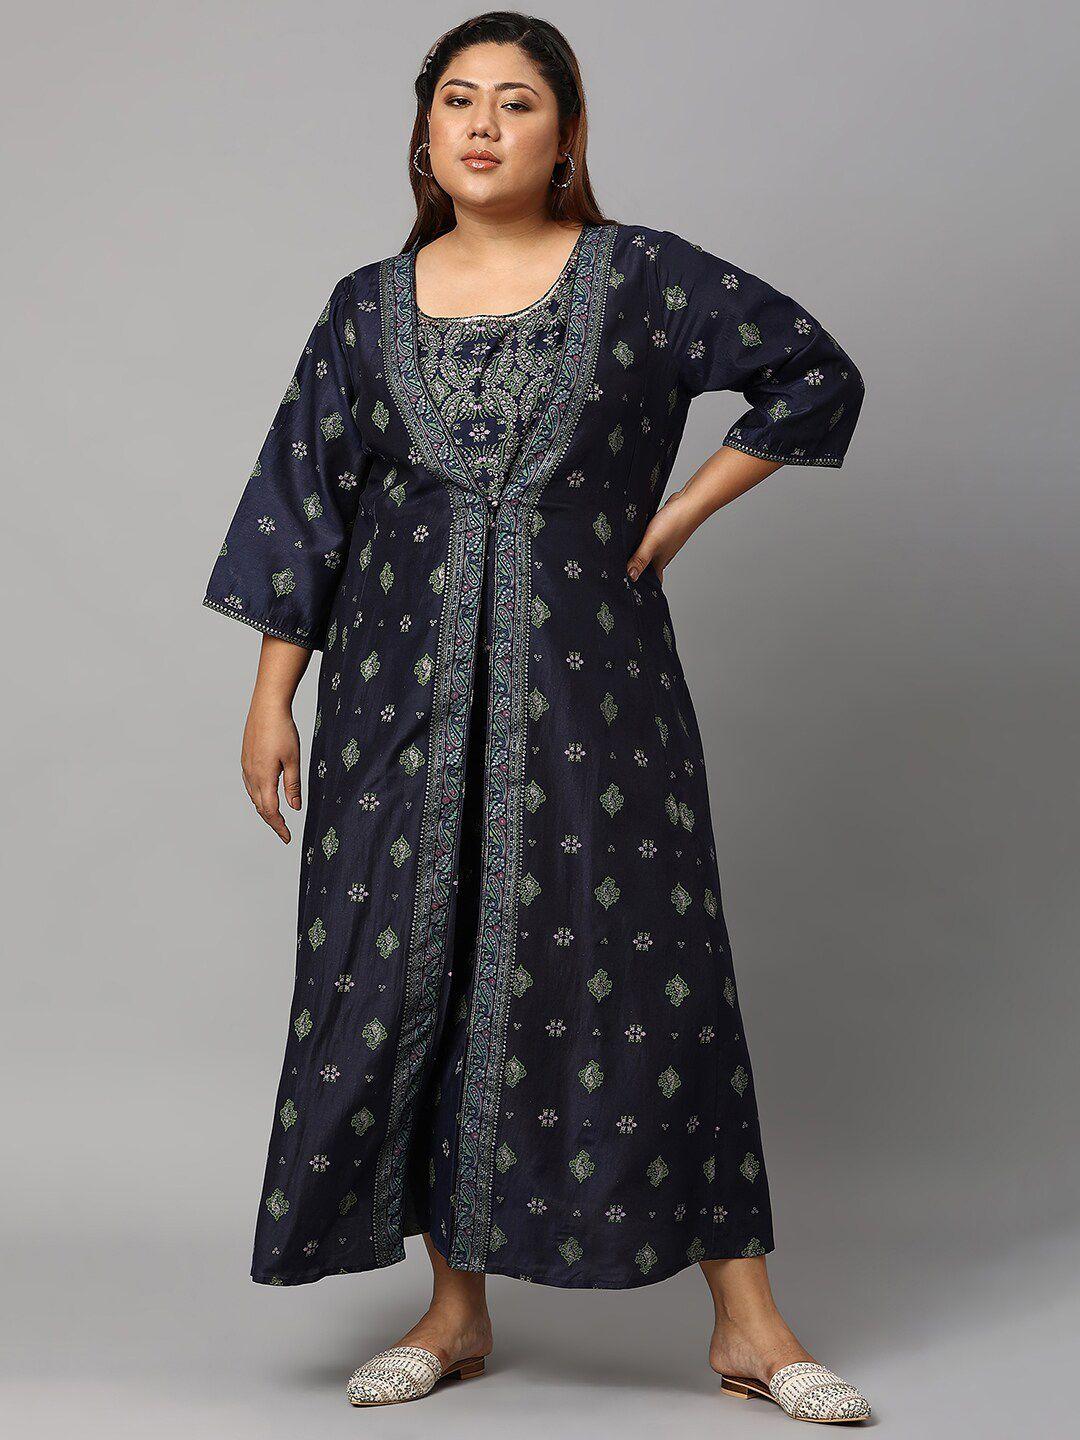 w blue & green floral embroidered ethnic maxi dress